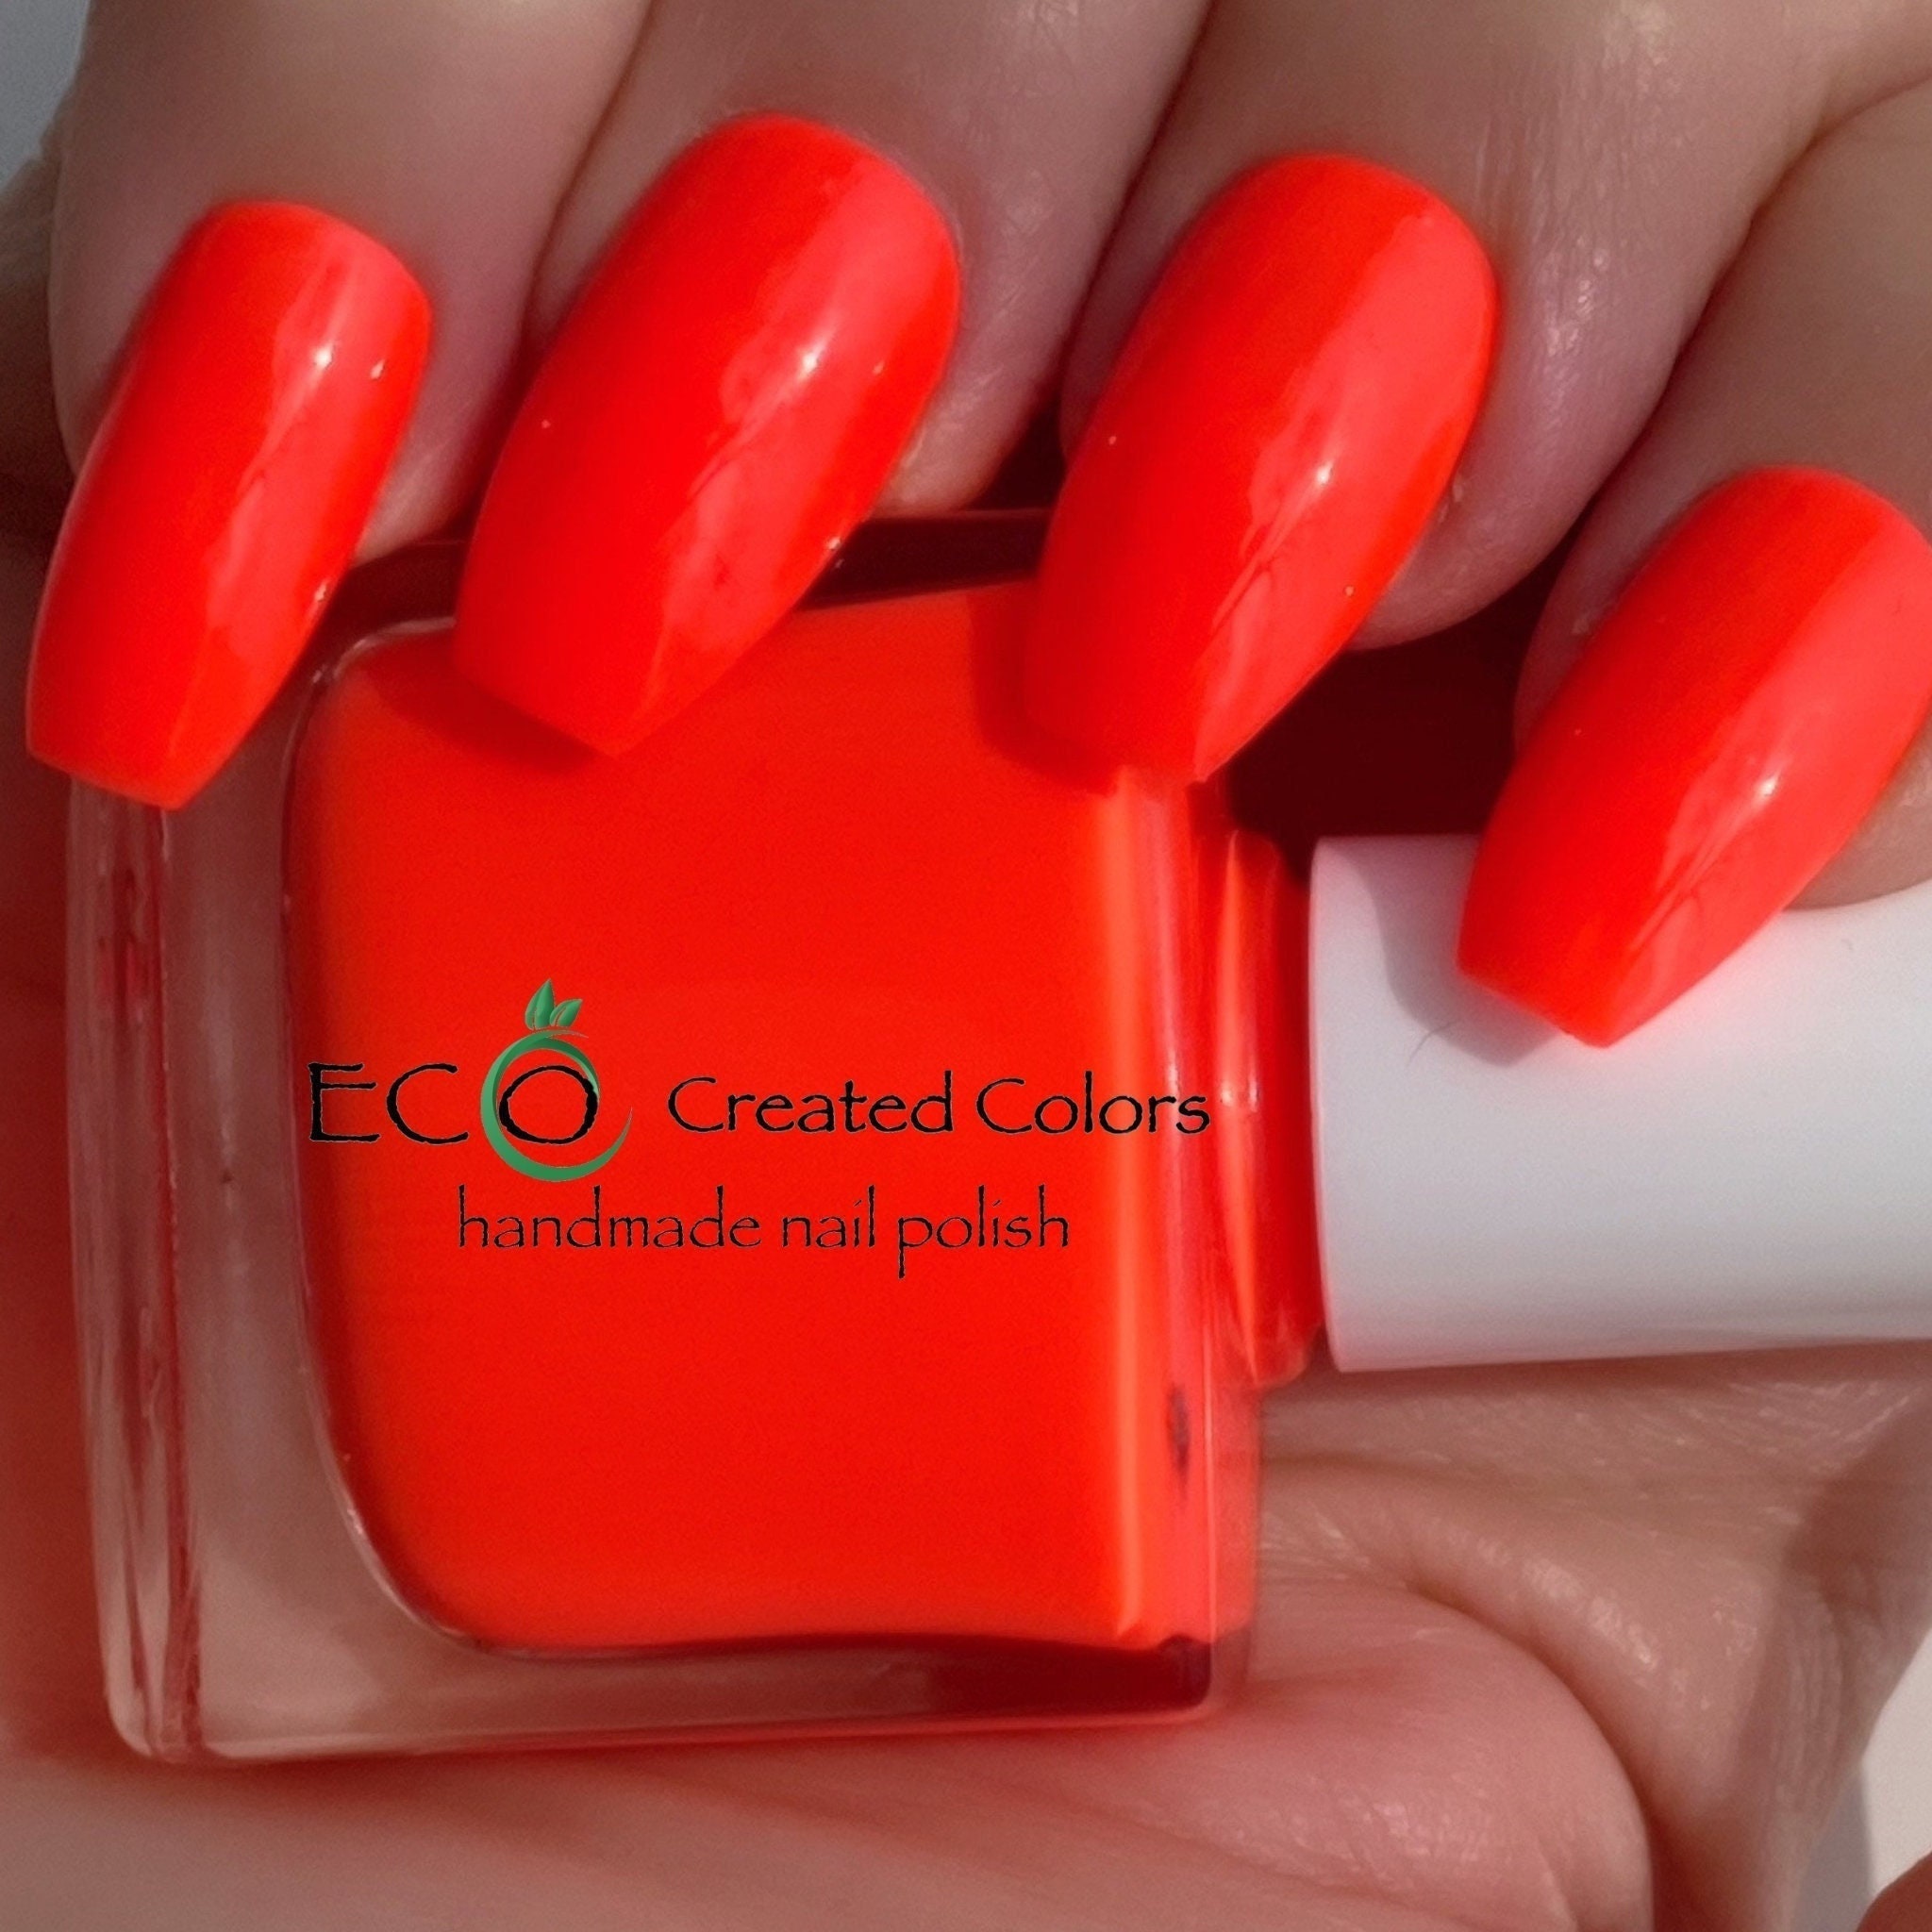 Rihanna Mixes Up Orange-Red Nail Color For The Grammys (PHOTO) | HuffPost  Life